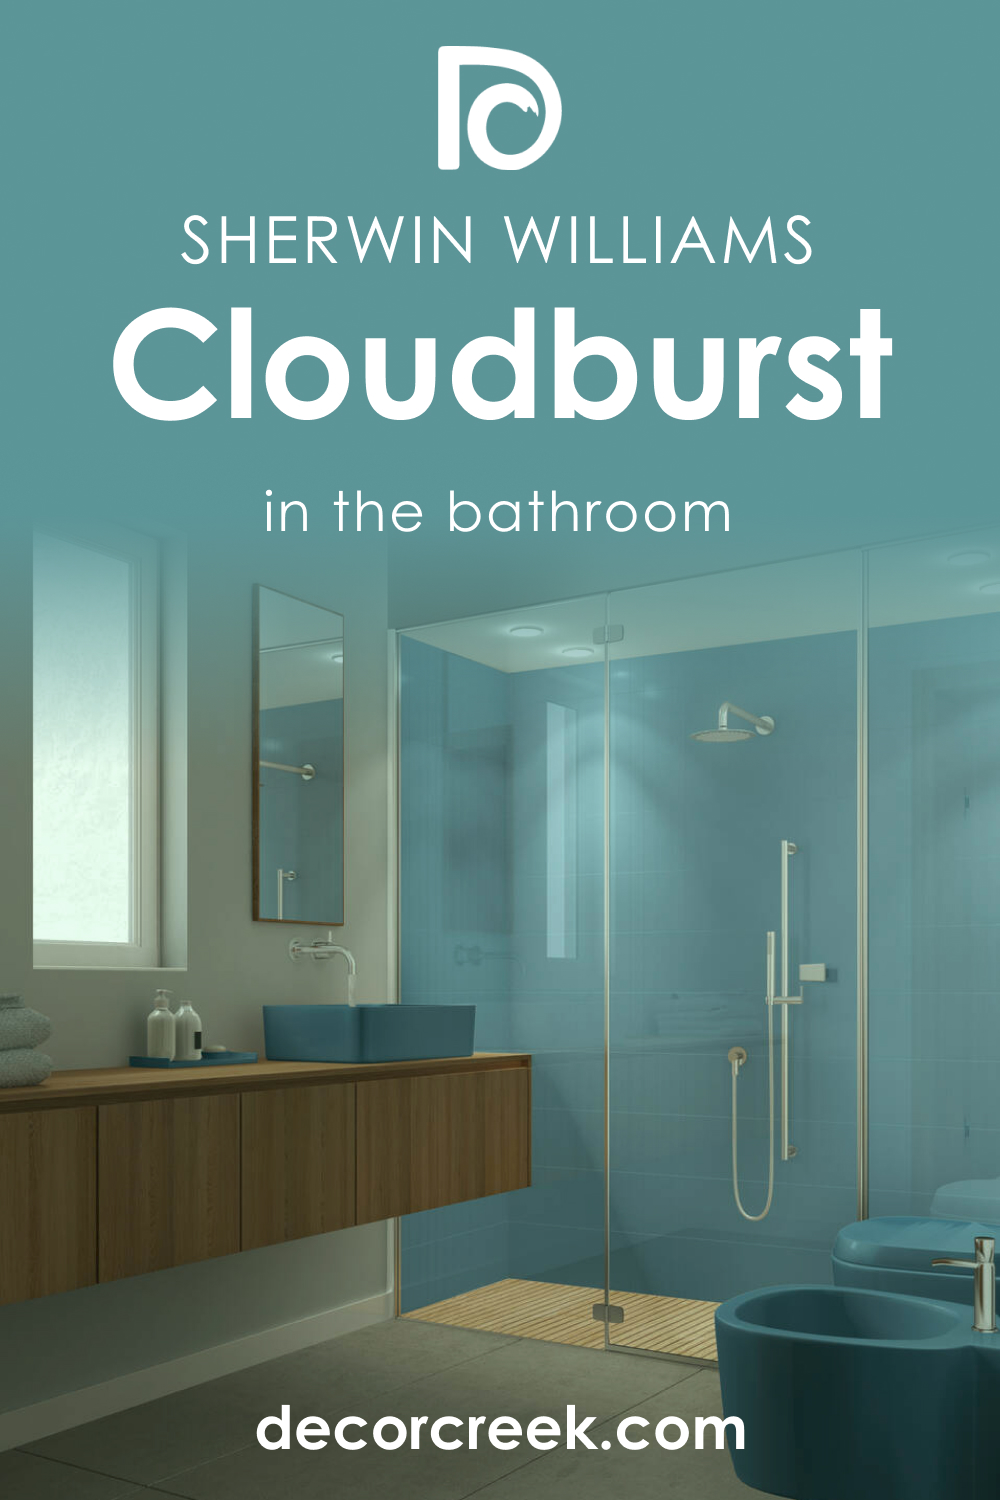 How to Use SW 6487 Cloudburst in the Bathroom?